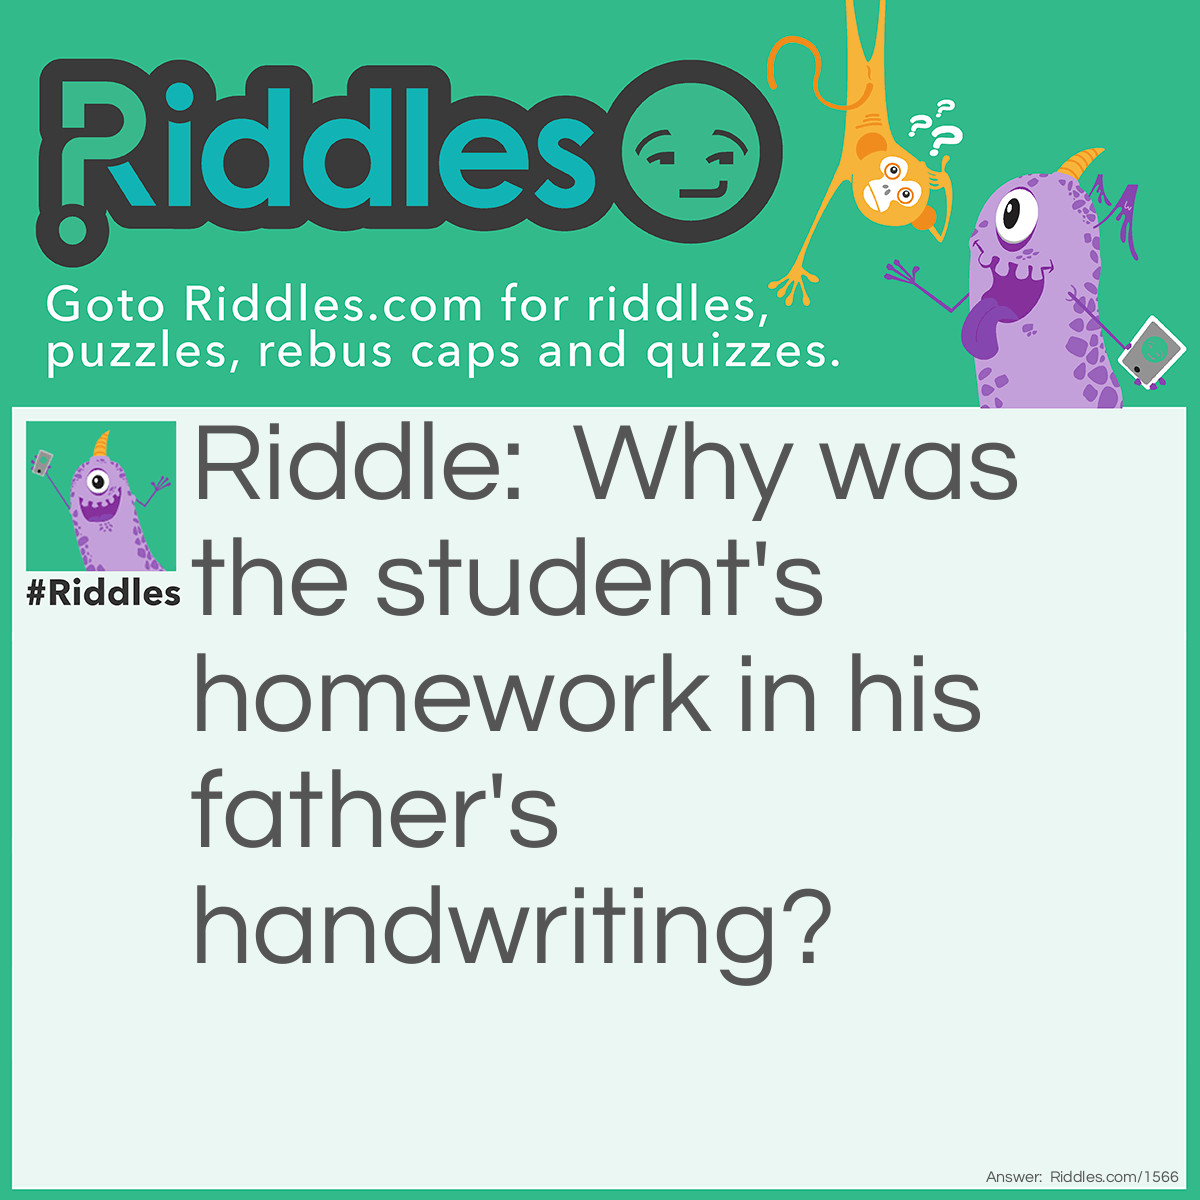 Riddle: Why was the student's homework in his father's handwriting? Answer: Because the student borrowed his pen.